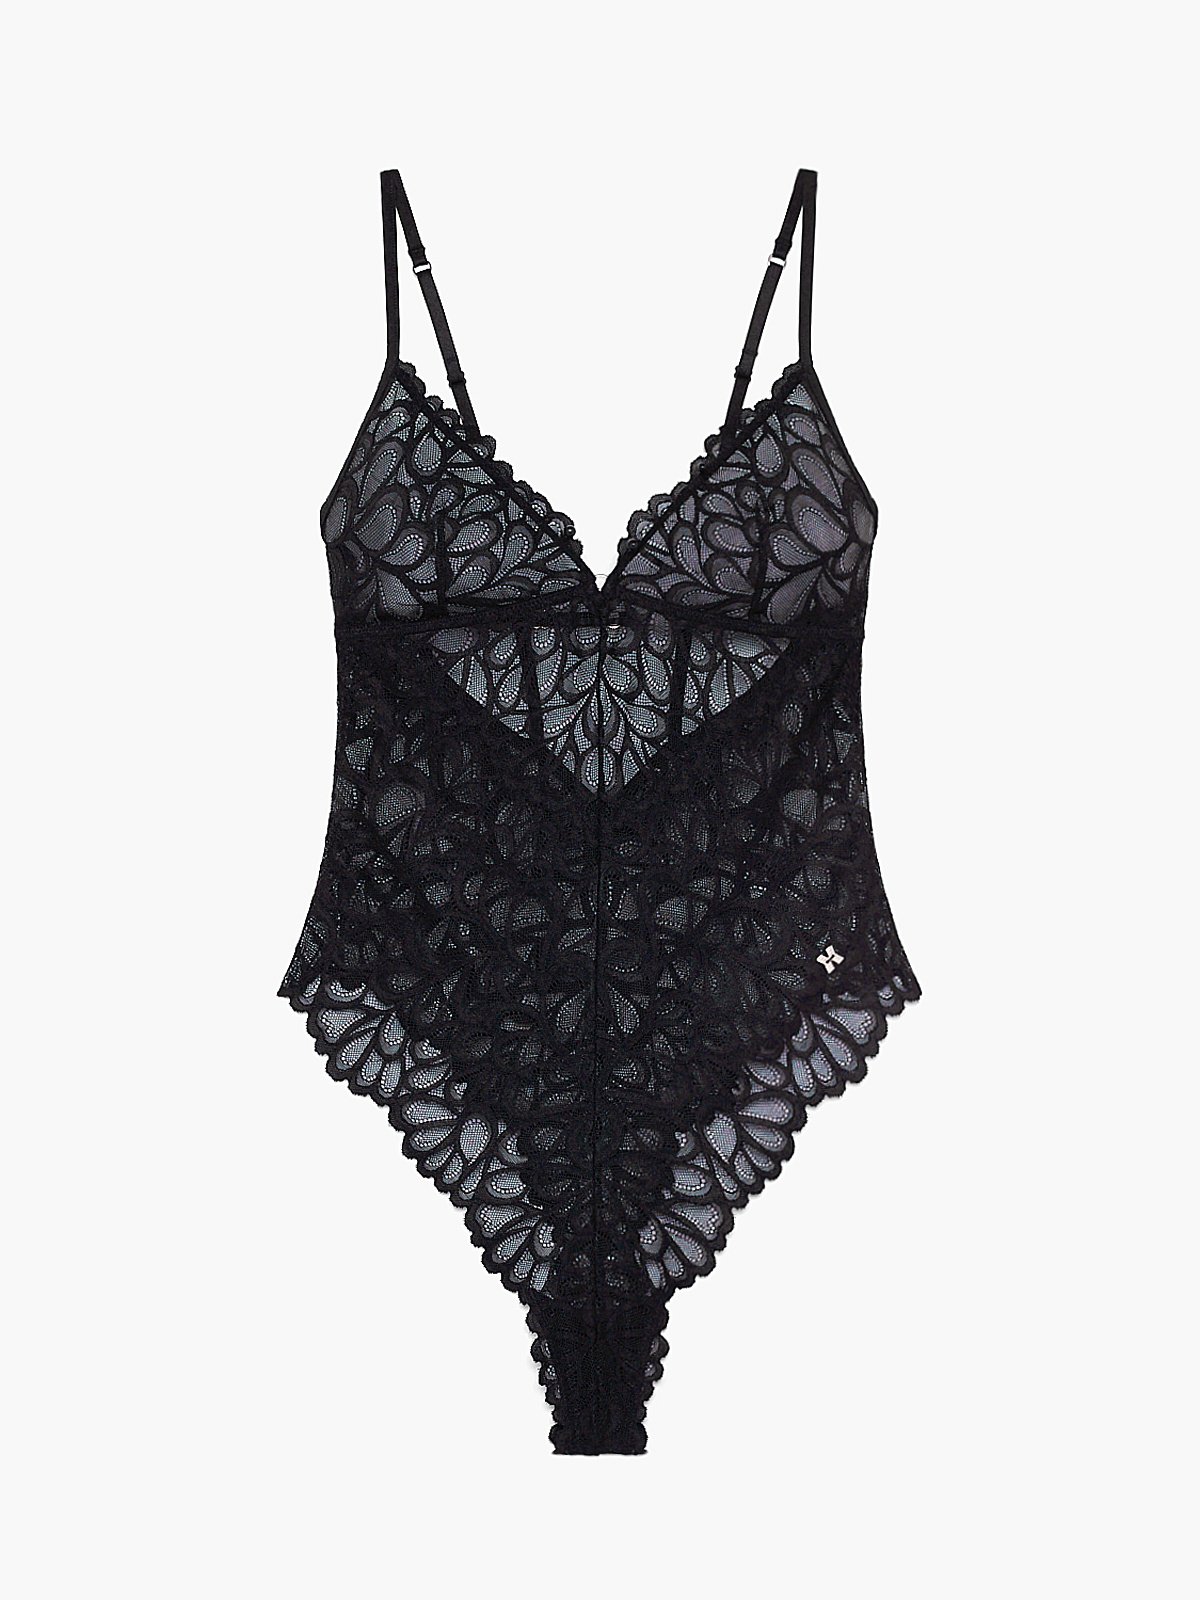 Savage Not Sorry Allover Lace Teddy in Black | SAVAGE X FENTY Germany